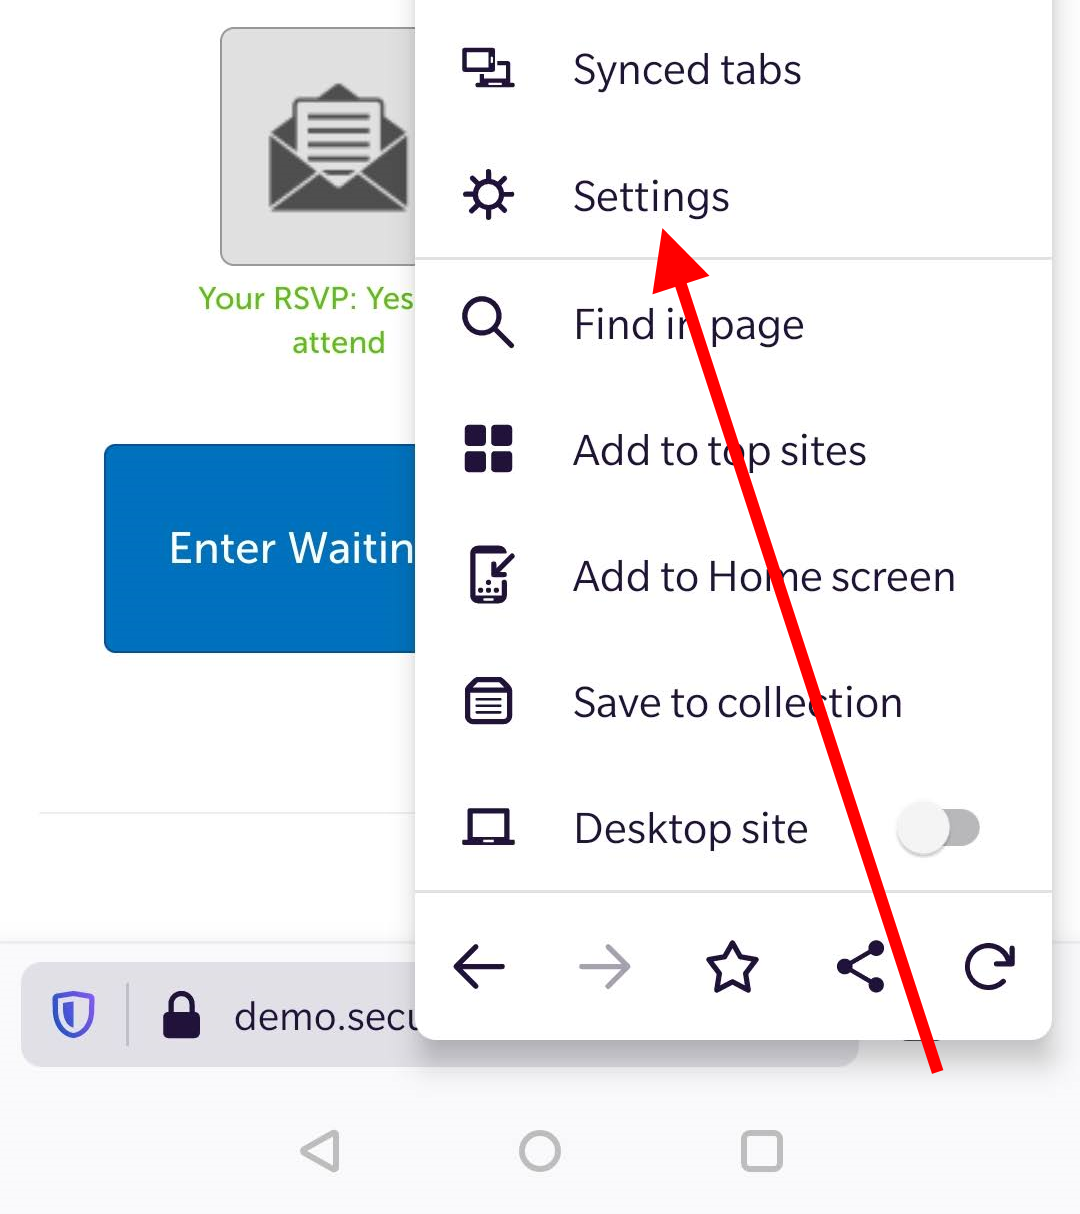 Arrow pointing at "Settings"